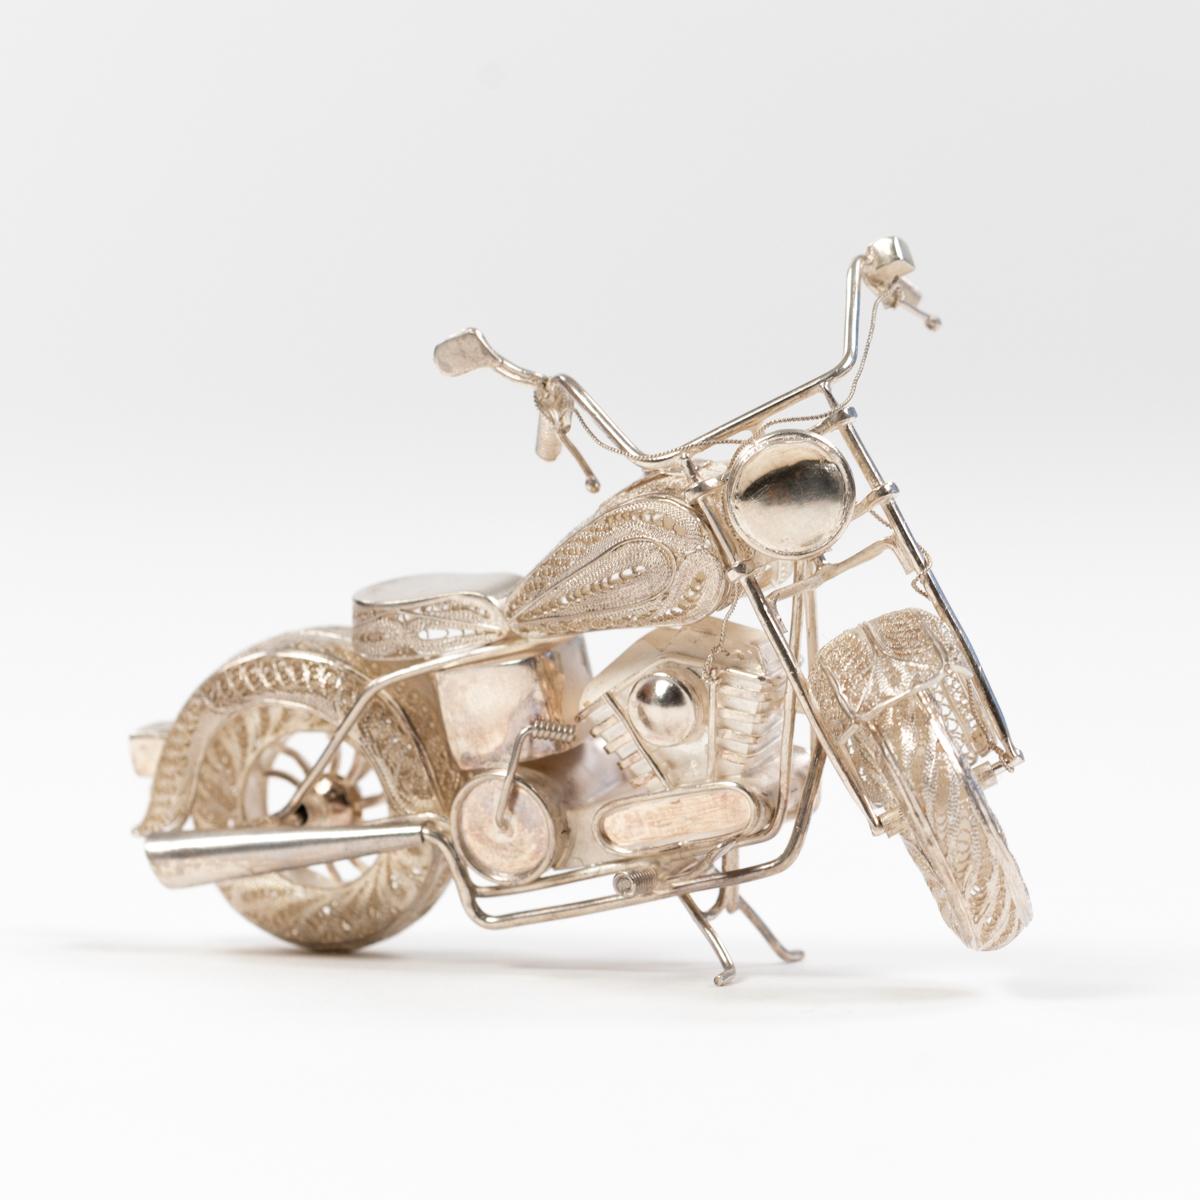 This sculpture in 925 silver of a Harley Davidson is a true masterpiece of filigree technique.
Filigree comes from the Latin and consists of 2 words filum (thread) and granum (grain).
With the filigree technique, jewelry and objects are made from